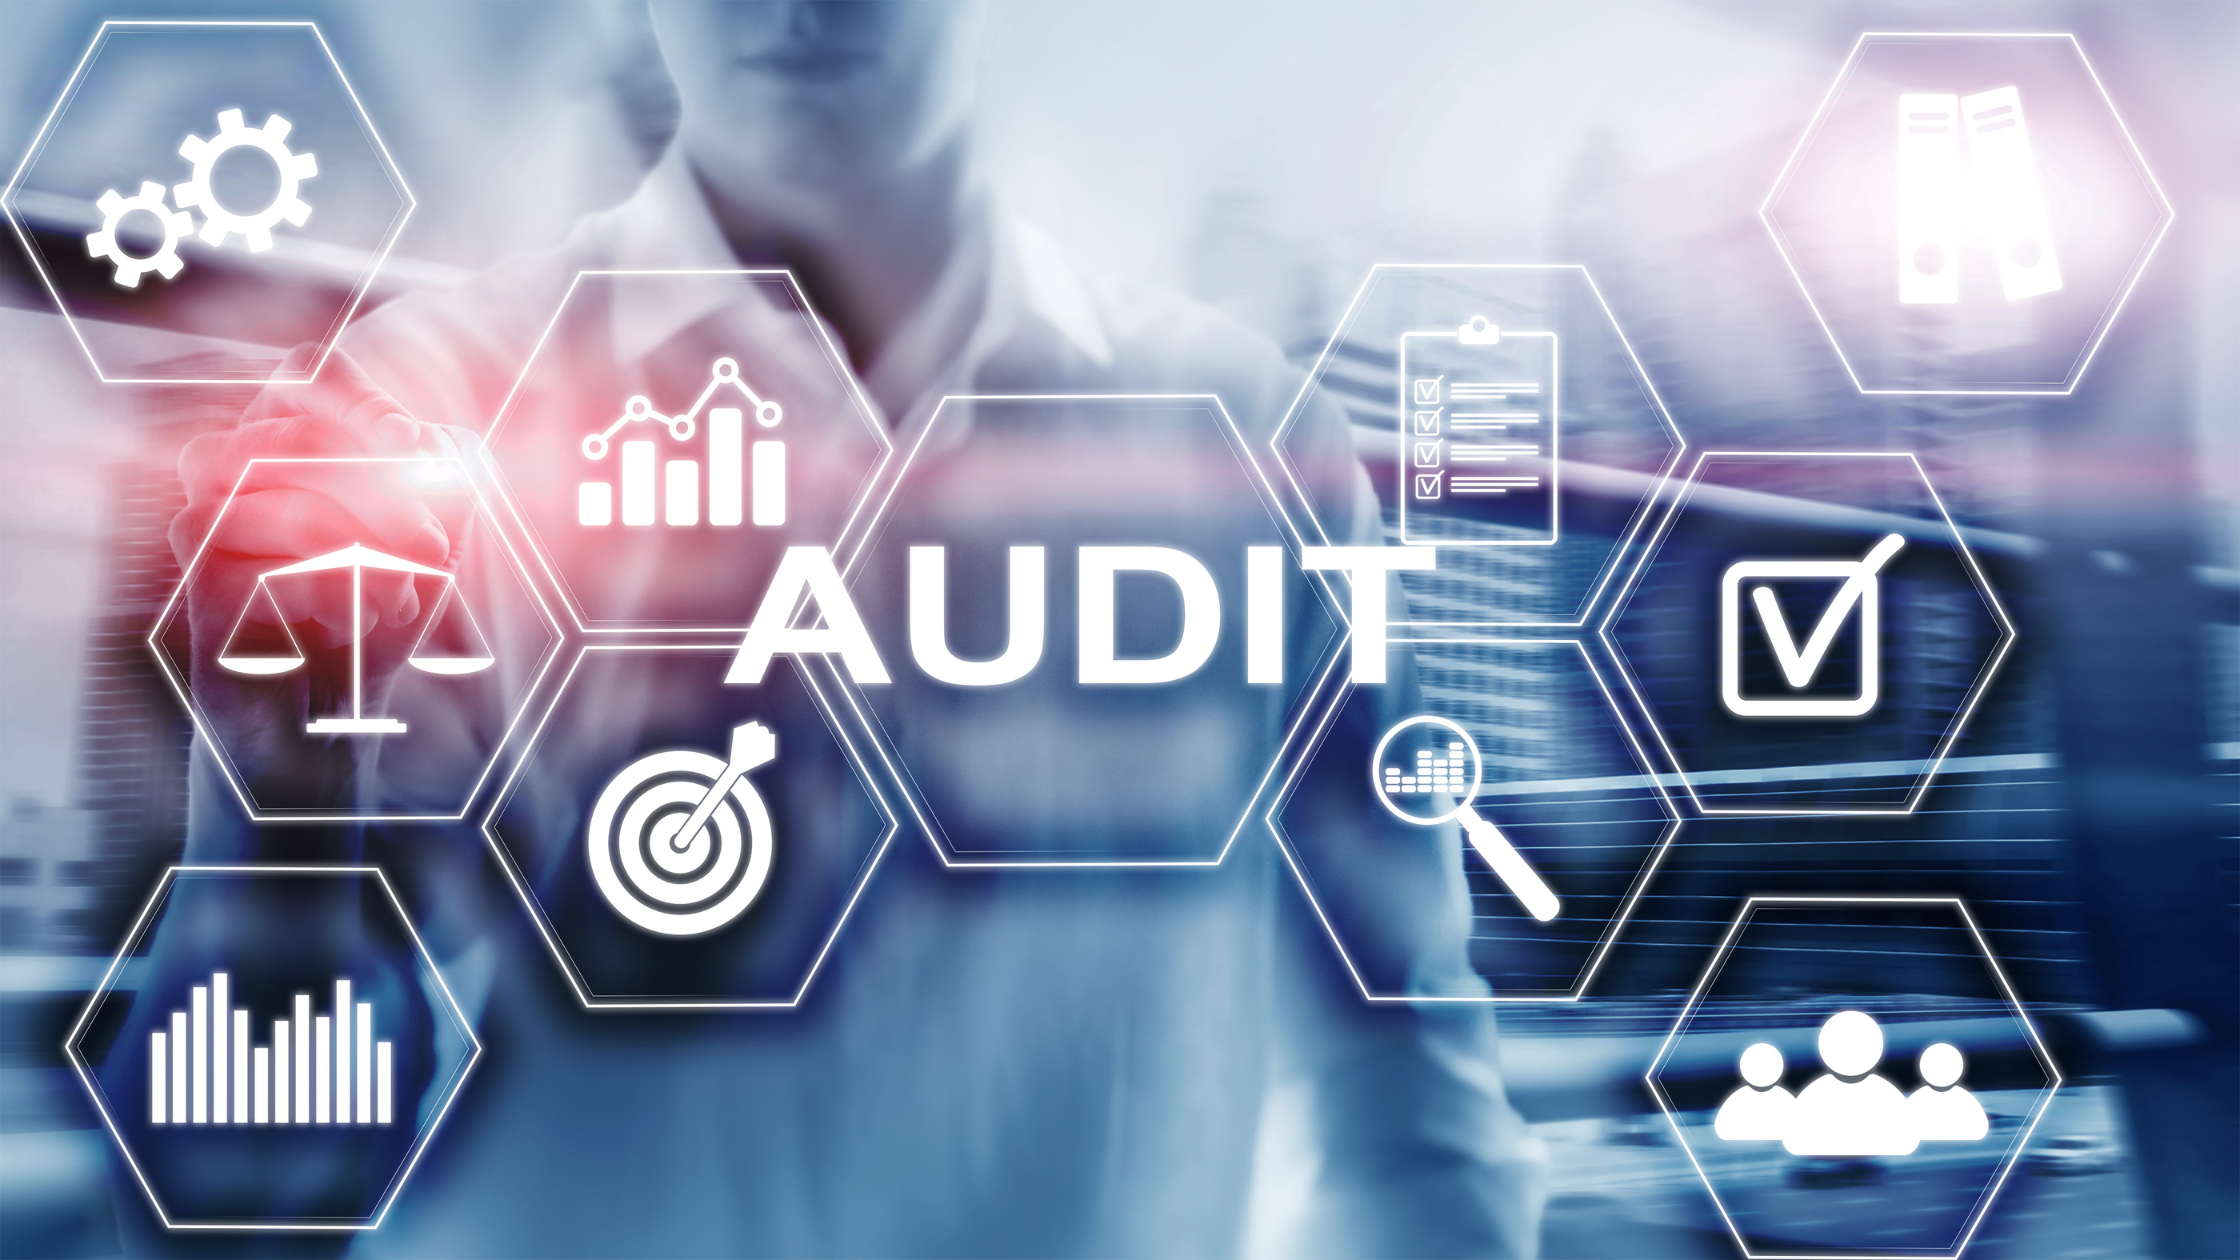 14 Ways for Your Business to Achieve Audit Readiness